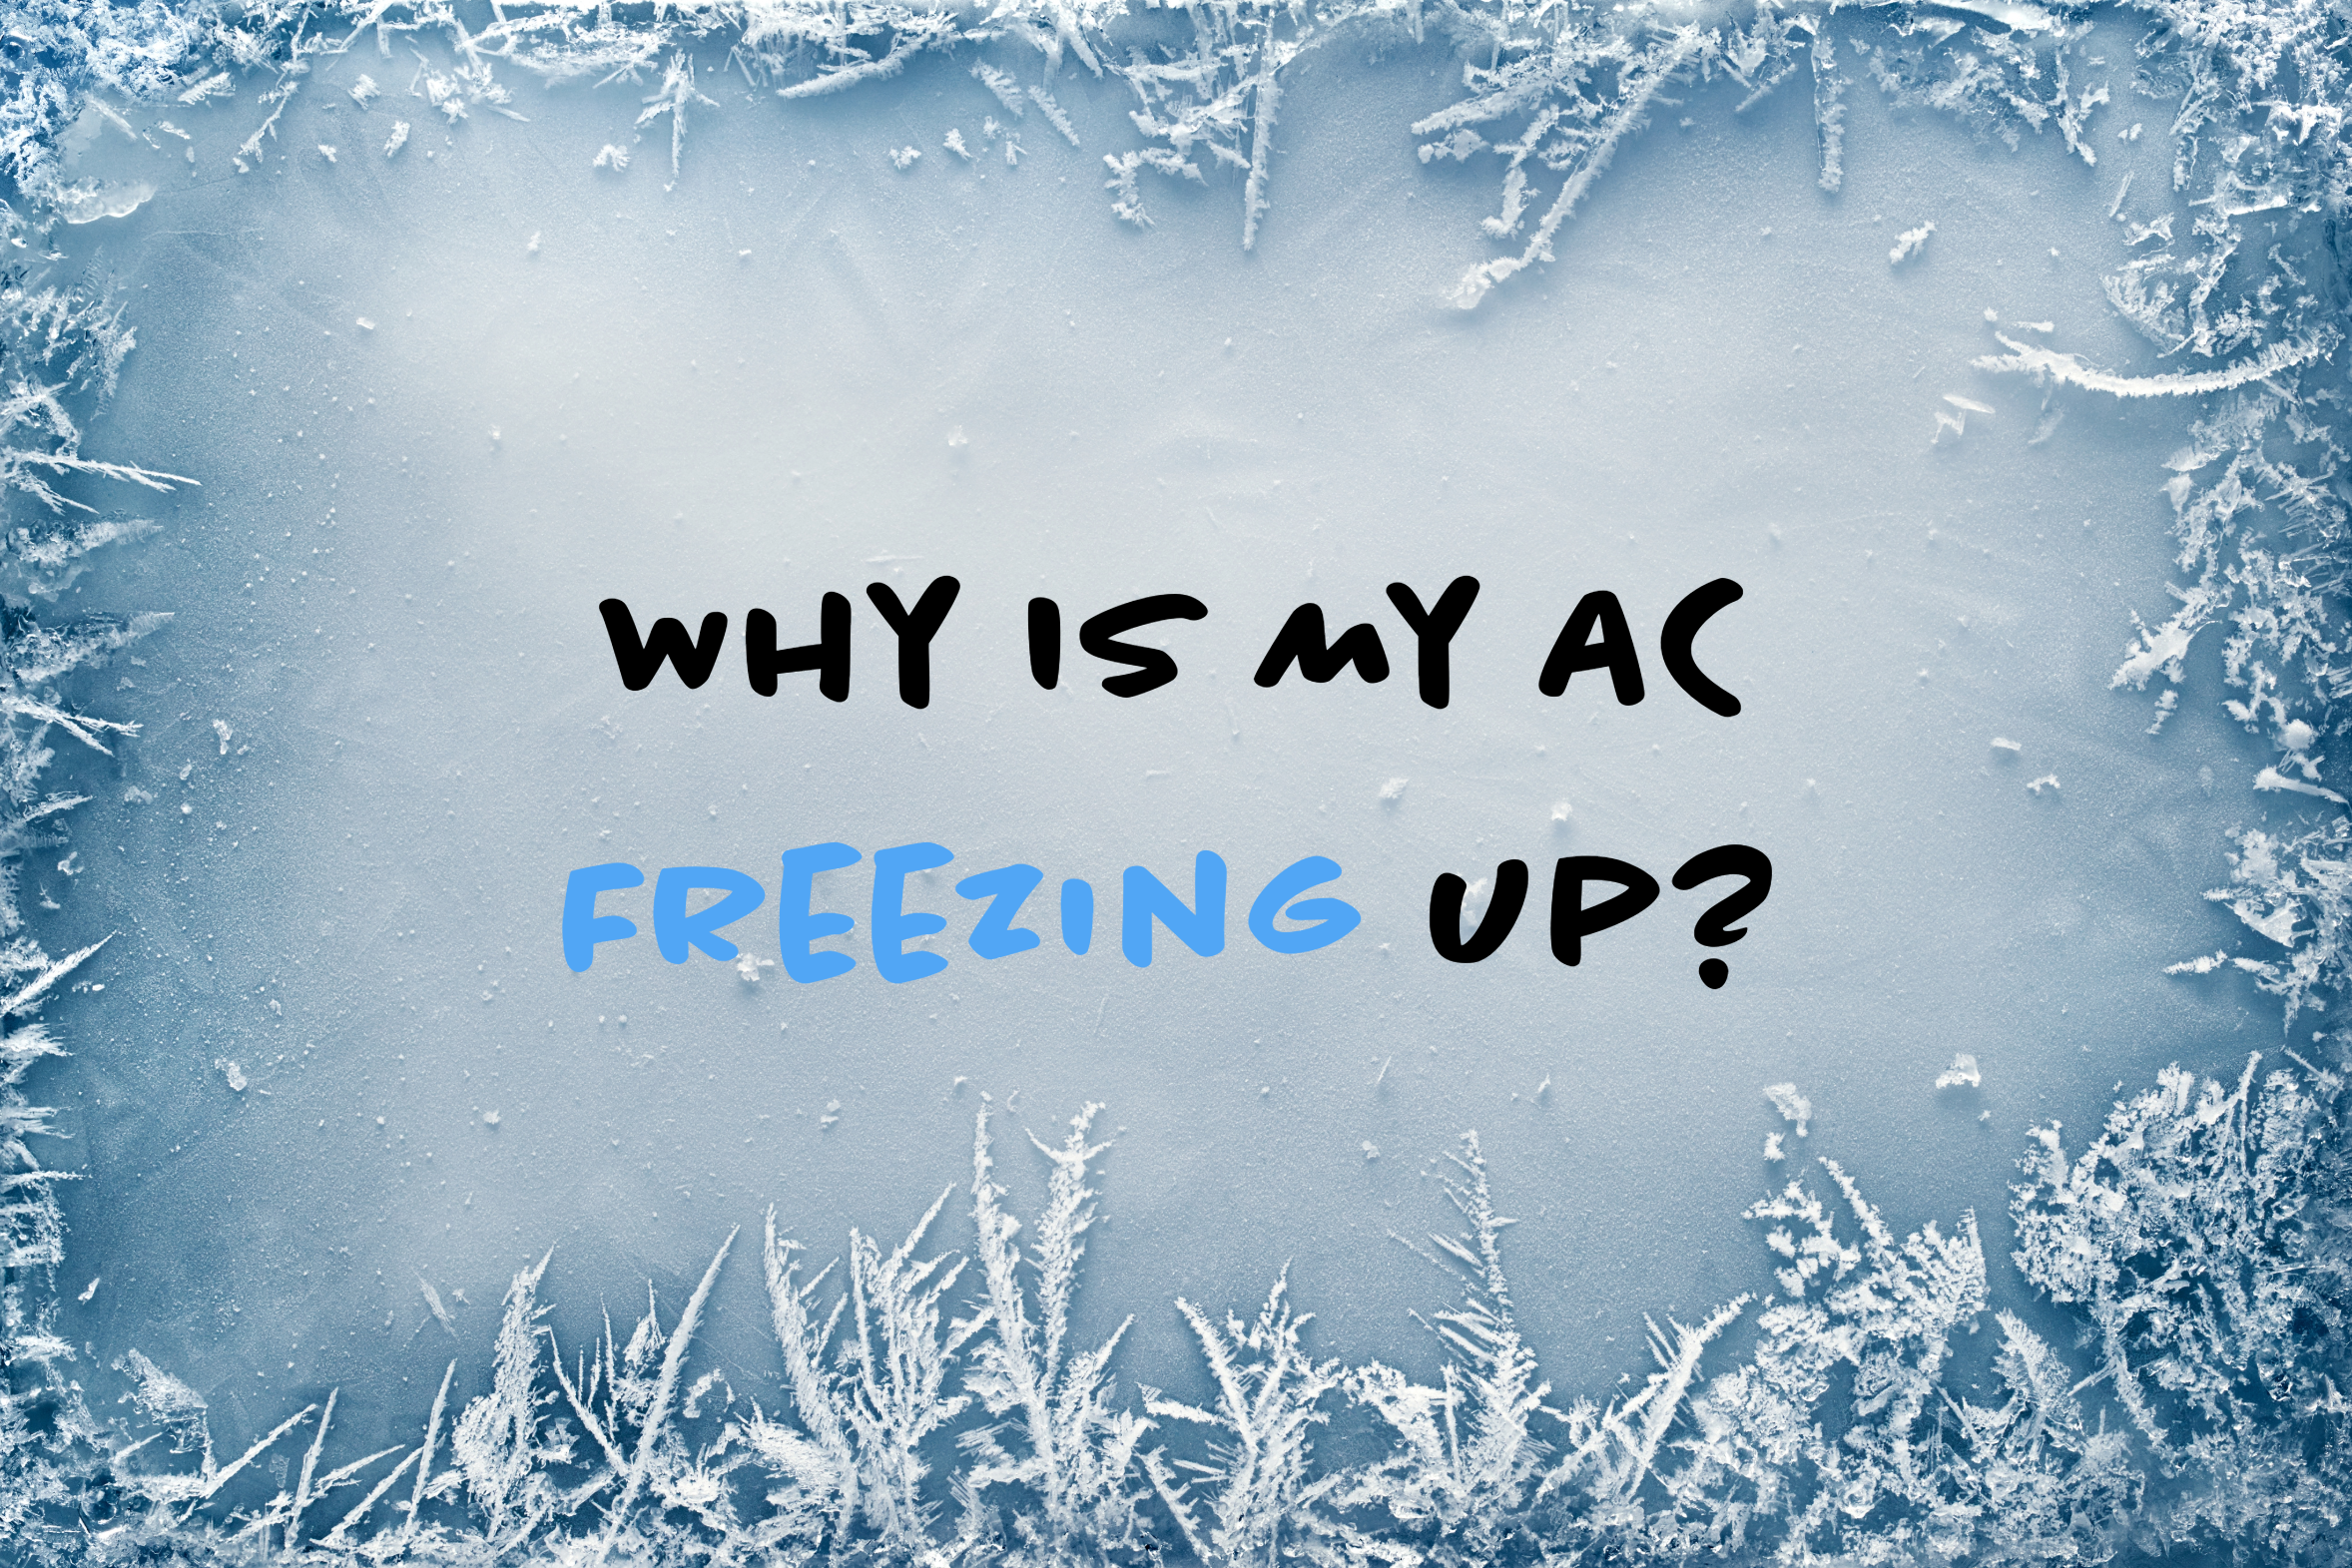 Blog on how to troubleshoot when your AC is freezing up.